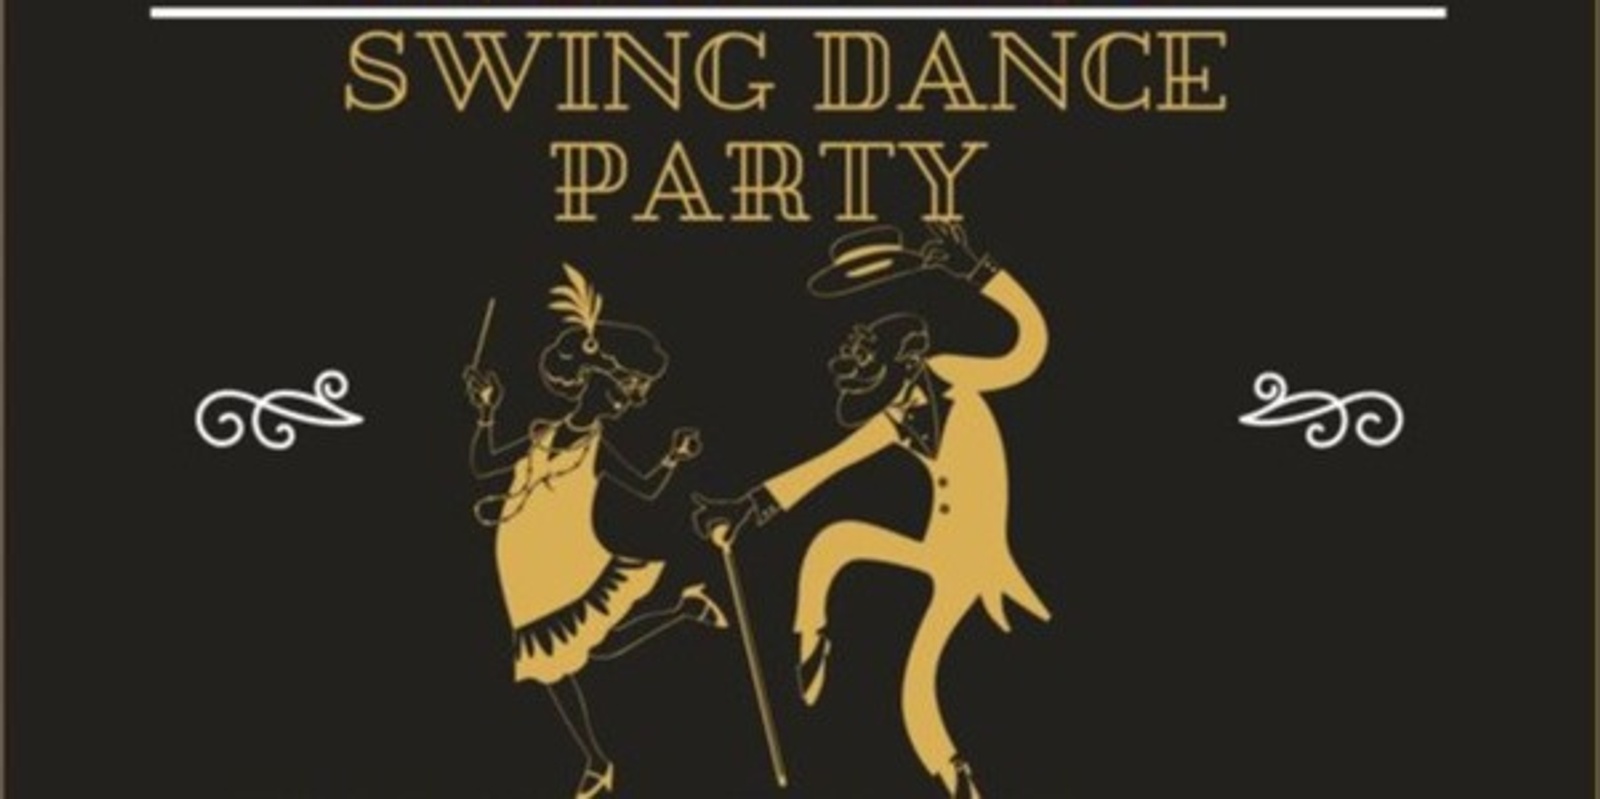 Banner image for Central Highlands Swing Dance Party with live band The Martini Set 